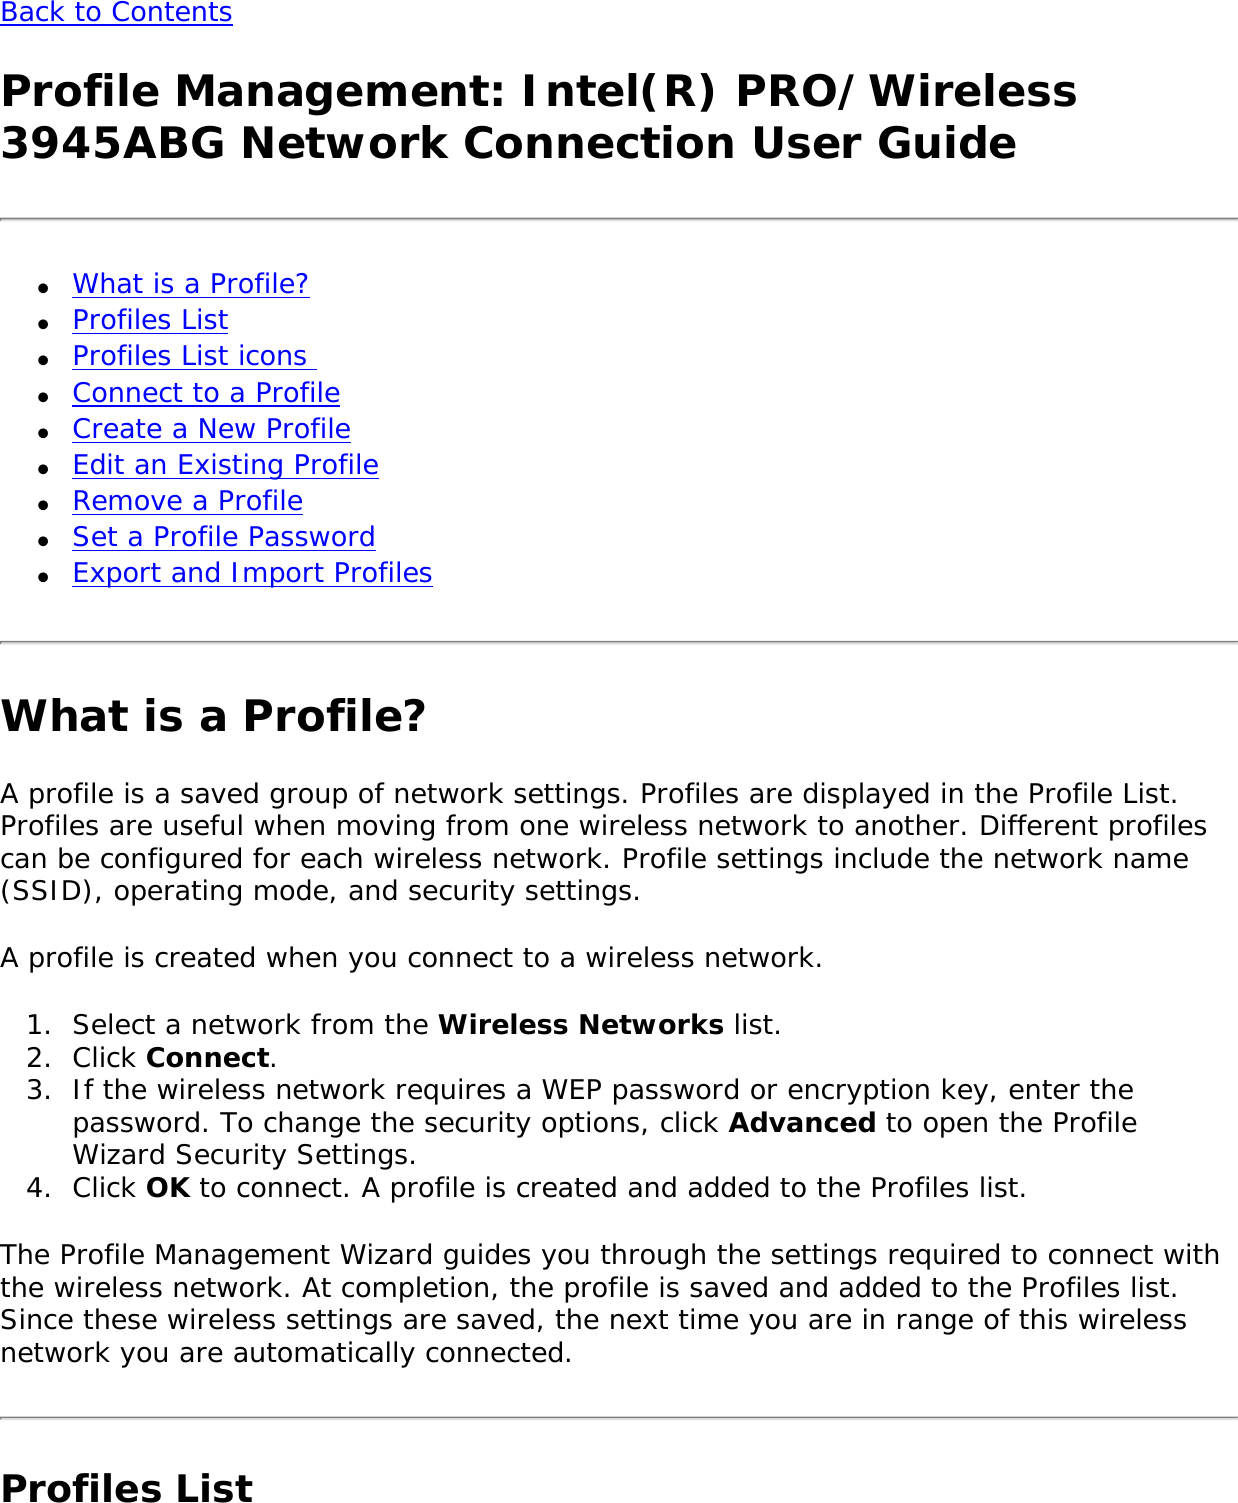 Back to Contents Profile Management: Intel(R) PRO/Wireless 3945ABG Network Connection User Guide●     What is a Profile? ●     Profiles List ●     Profiles List icons ●     Connect to a Profile ●     Create a New Profile●     Edit an Existing Profile●     Remove a Profile●     Set a Profile Password ●     Export and Import Profiles What is a Profile?A profile is a saved group of network settings. Profiles are displayed in the Profile List. Profiles are useful when moving from one wireless network to another. Different profiles can be configured for each wireless network. Profile settings include the network name (SSID), operating mode, and security settings. A profile is created when you connect to a wireless network. 1.  Select a network from the Wireless Networks list.2.  Click Connect. 3.  If the wireless network requires a WEP password or encryption key, enter the password. To change the security options, click Advanced to open the Profile Wizard Security Settings. 4.  Click OK to connect. A profile is created and added to the Profiles list.The Profile Management Wizard guides you through the settings required to connect with the wireless network. At completion, the profile is saved and added to the Profiles list. Since these wireless settings are saved, the next time you are in range of this wireless network you are automatically connected. Profiles List